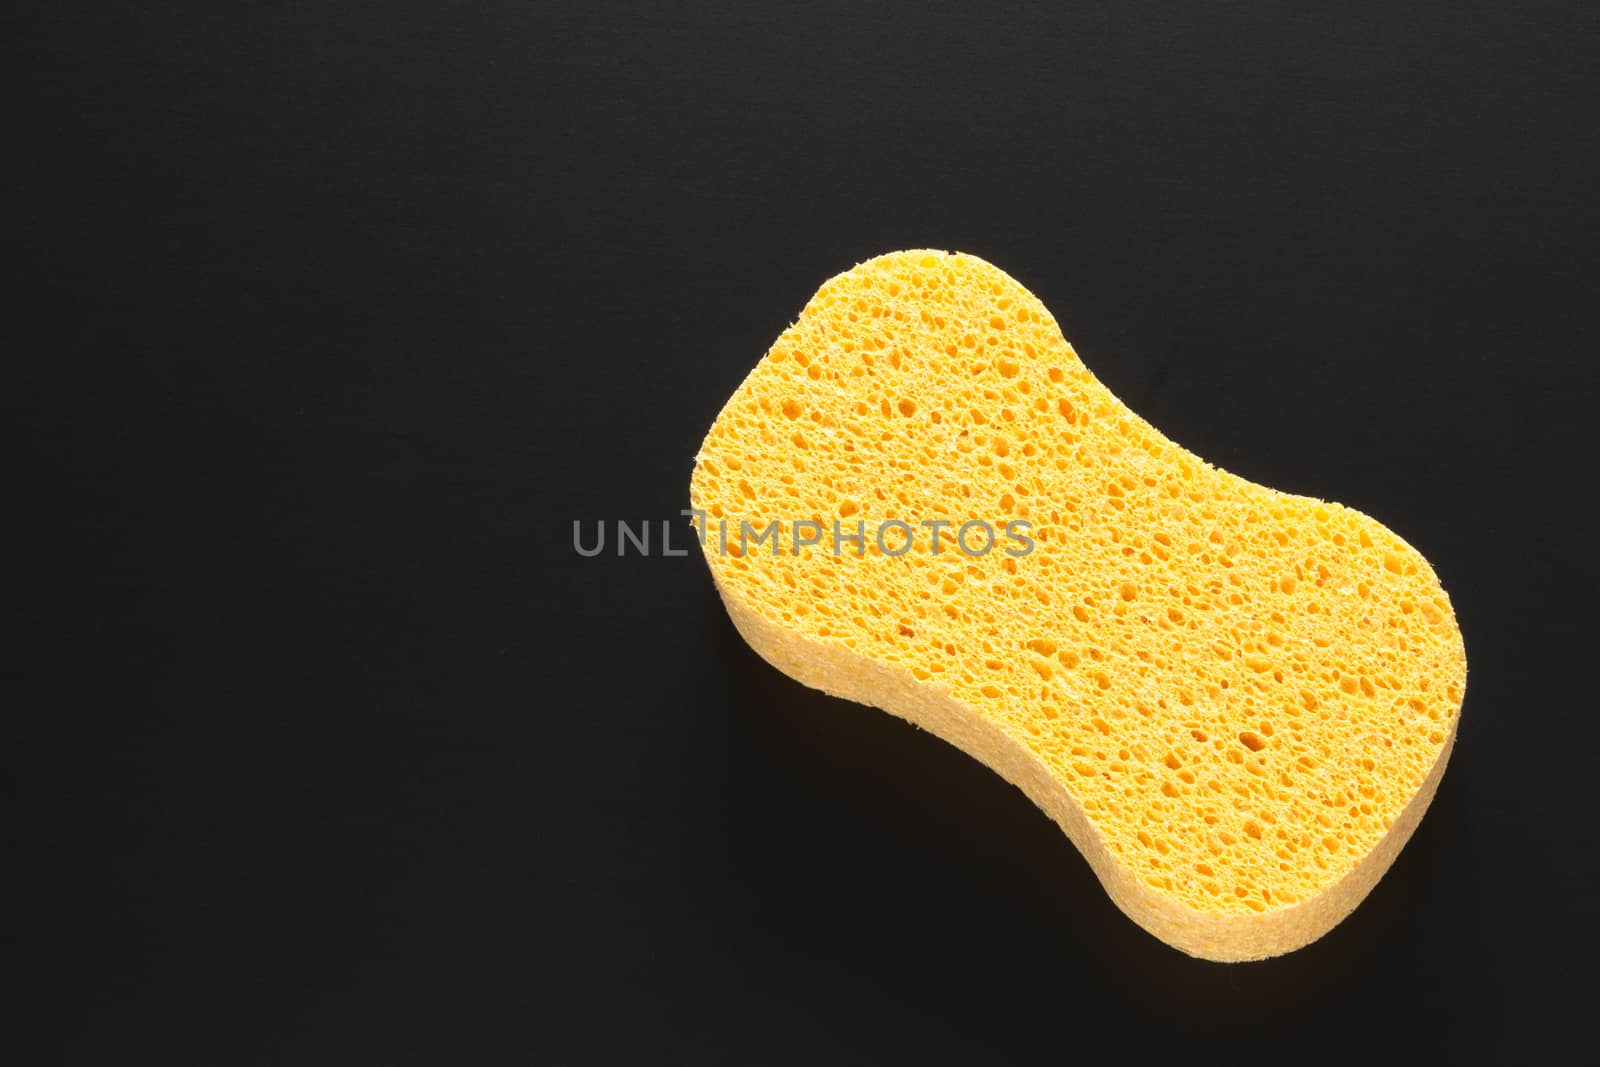 An image of a yellow sponge isolated on black background